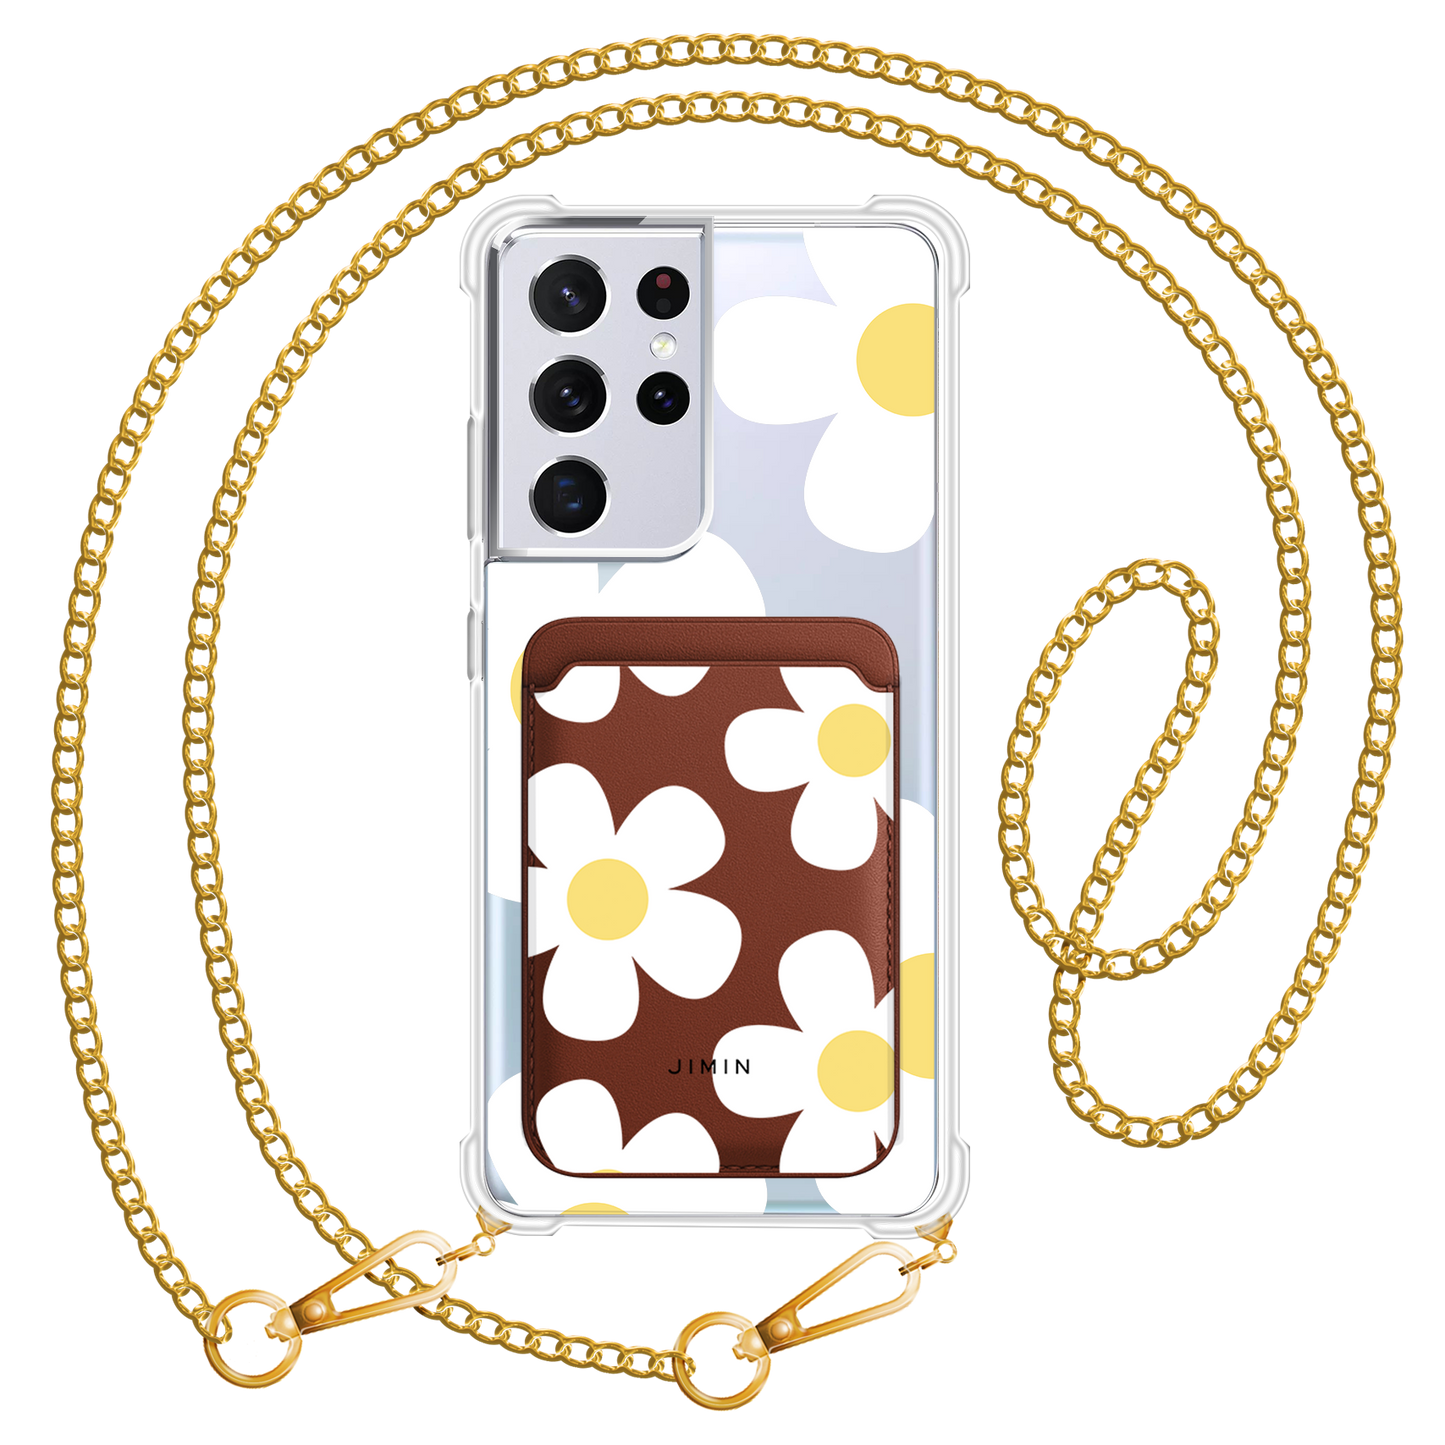 Android Magnetic Wallet Case - Daisy 4.0